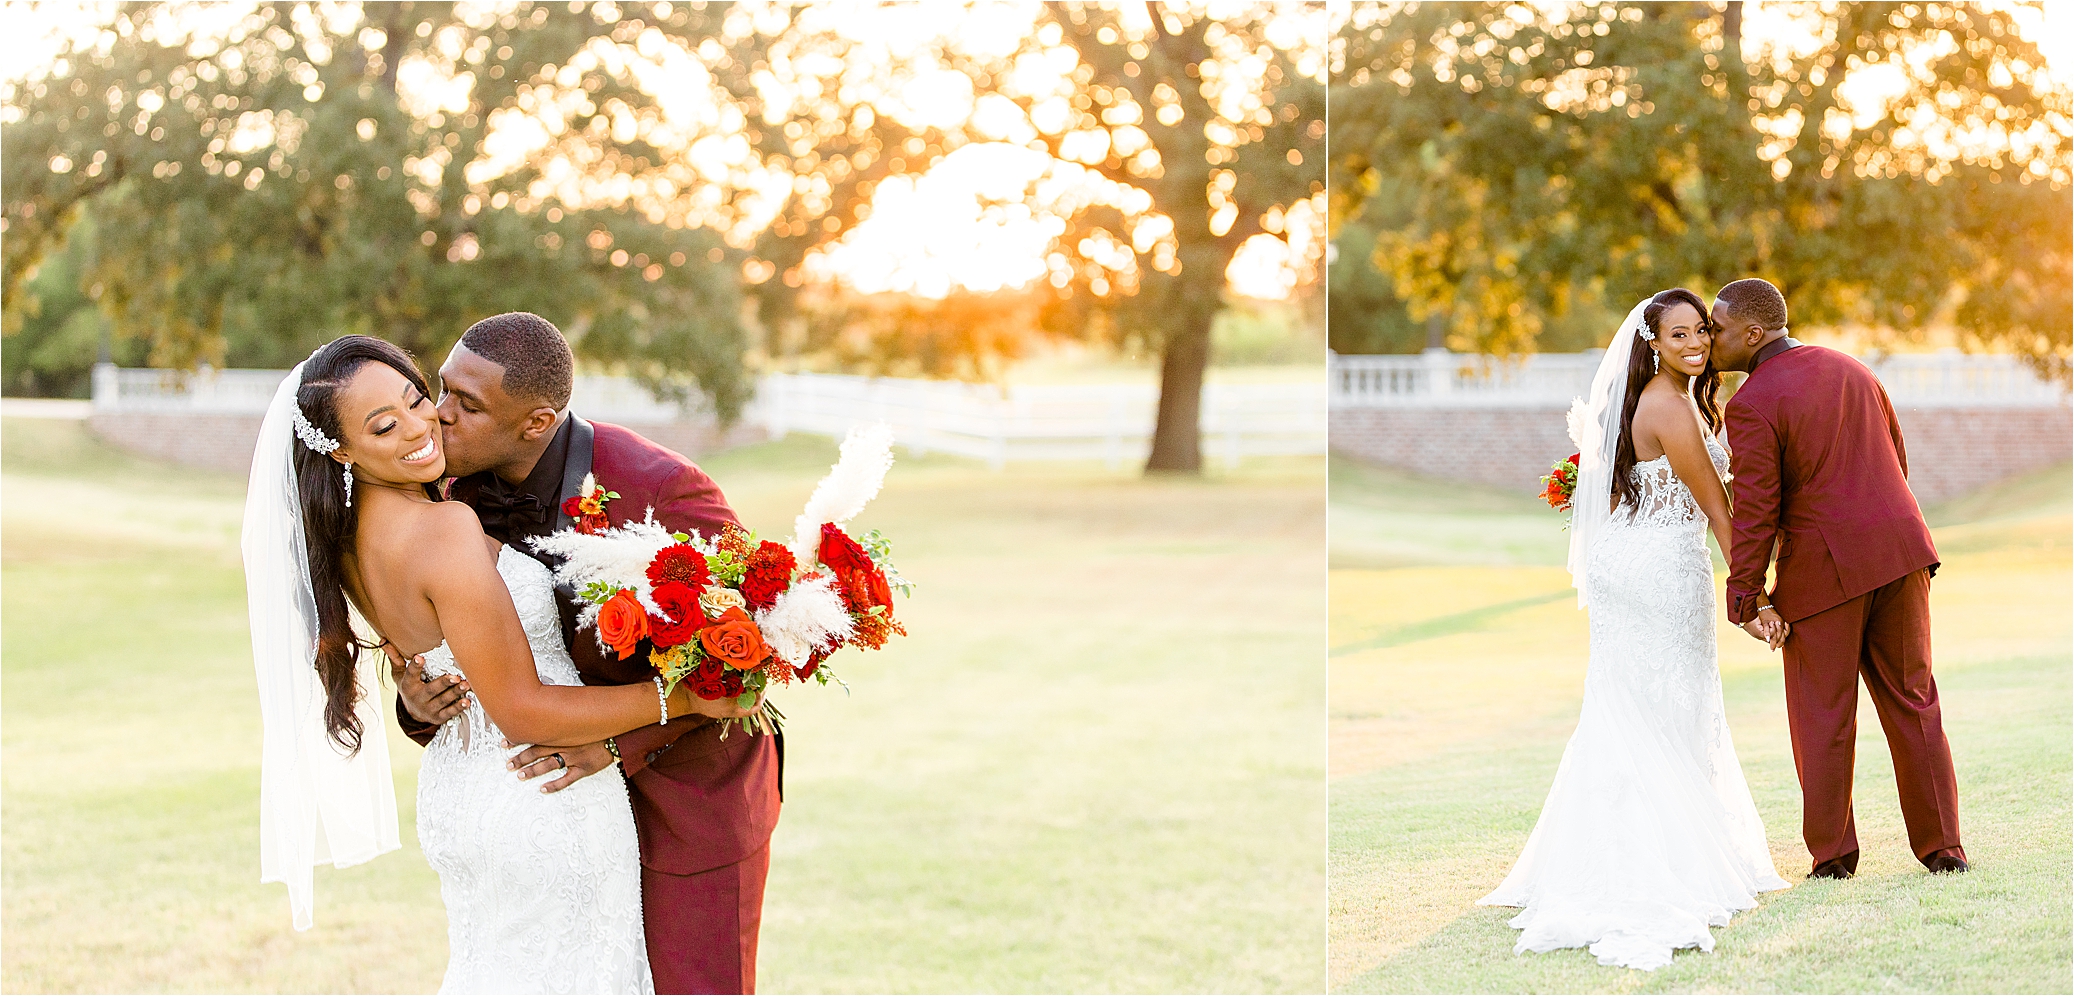 Newlyweds with a red bouquet share kisses in front of the sunset at The Milestone by Boerne Wedding Photographer Jillian Hogan 